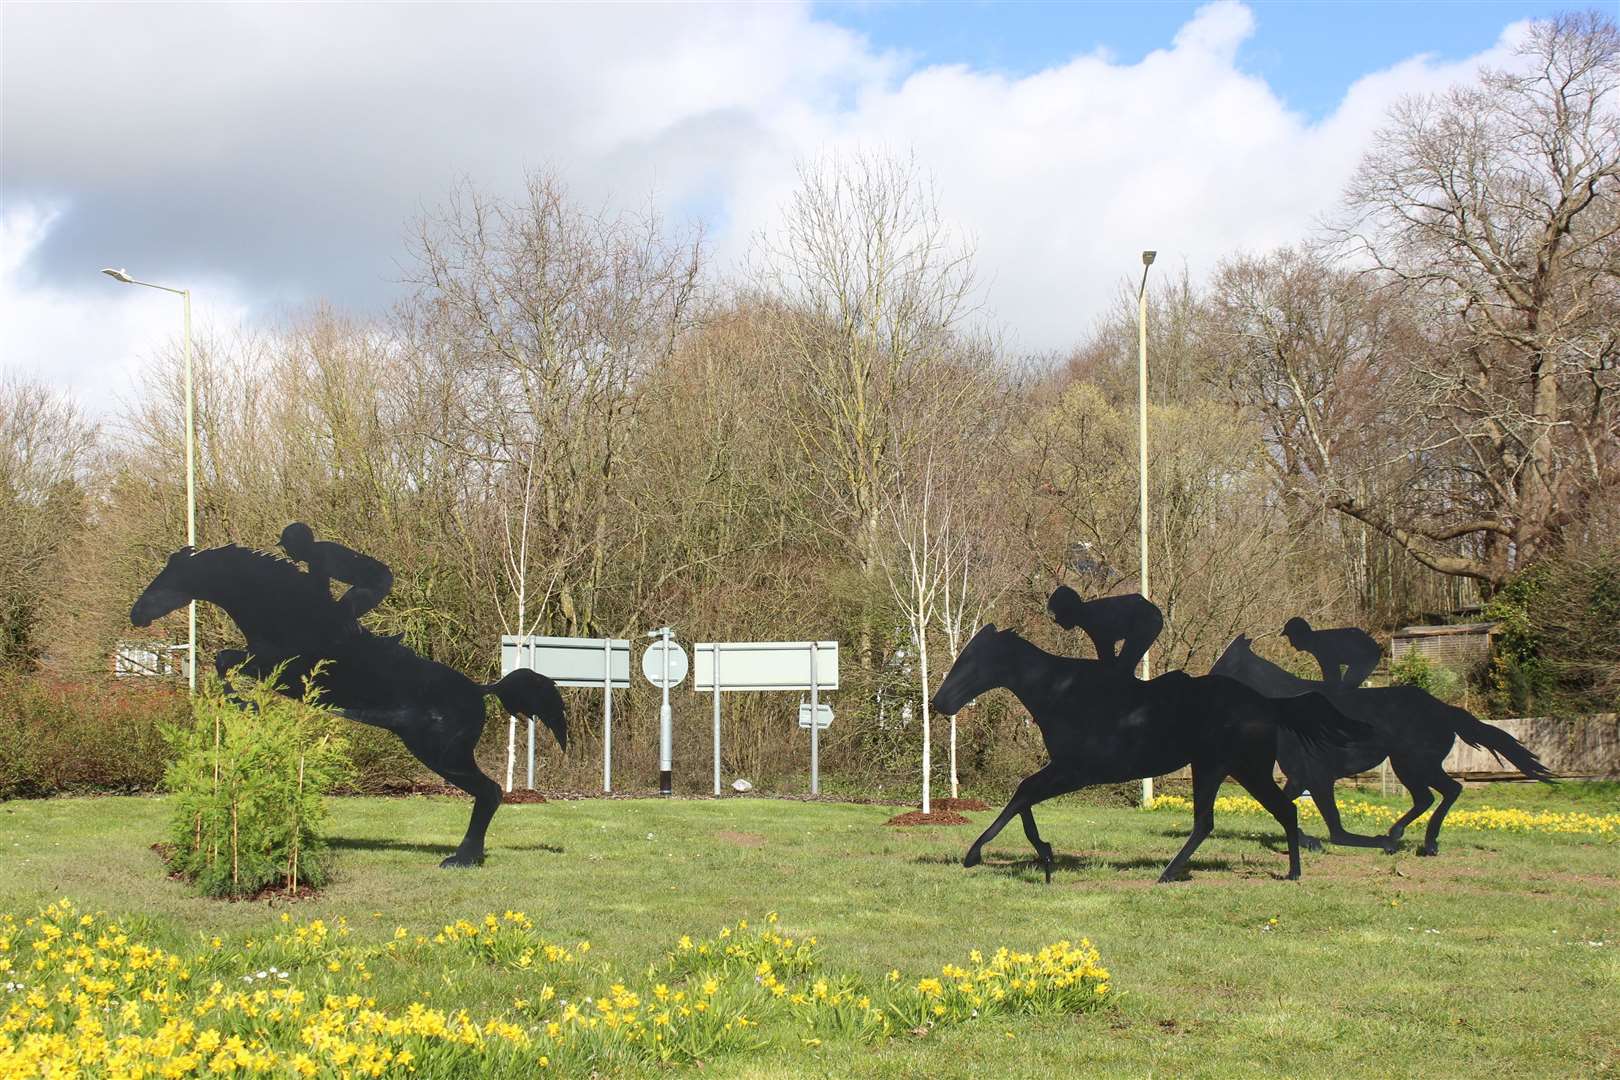 A roundabout on the A20 had horses placed on it earlier this year. Picture: Barry Goodwin